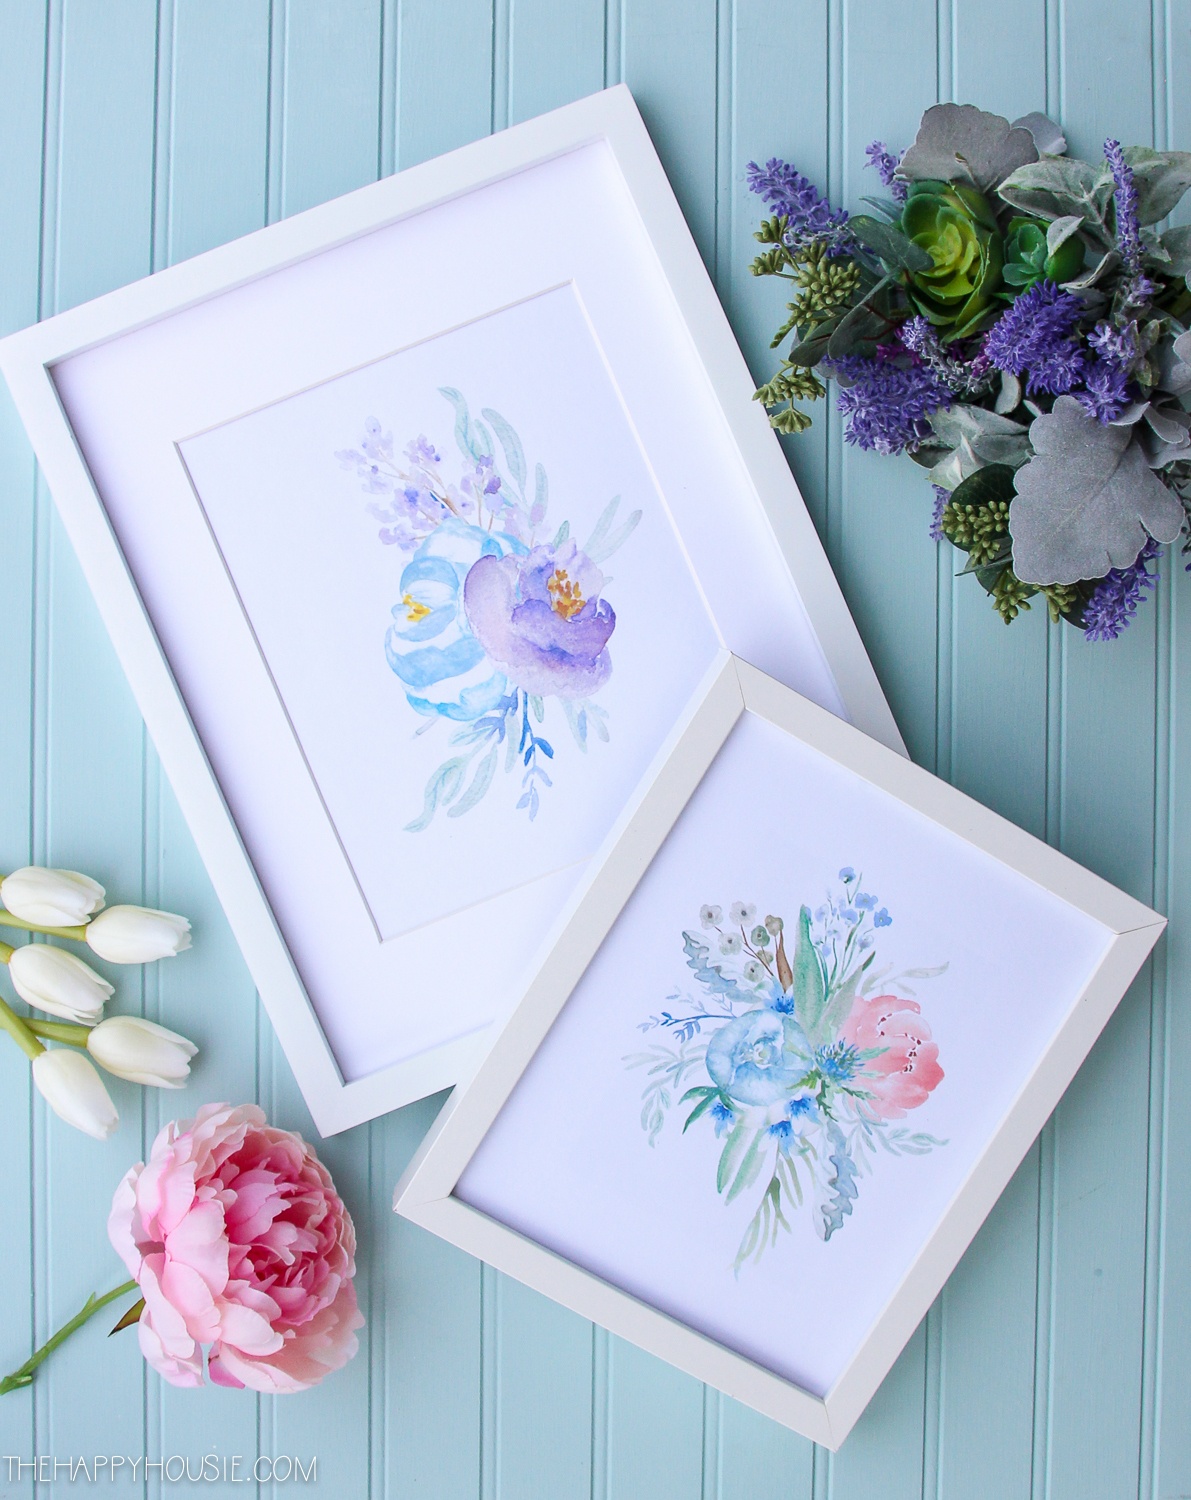 6 Free Printable Floral Watercolour Designs | The Happy Housie - Free Watercolor Printables